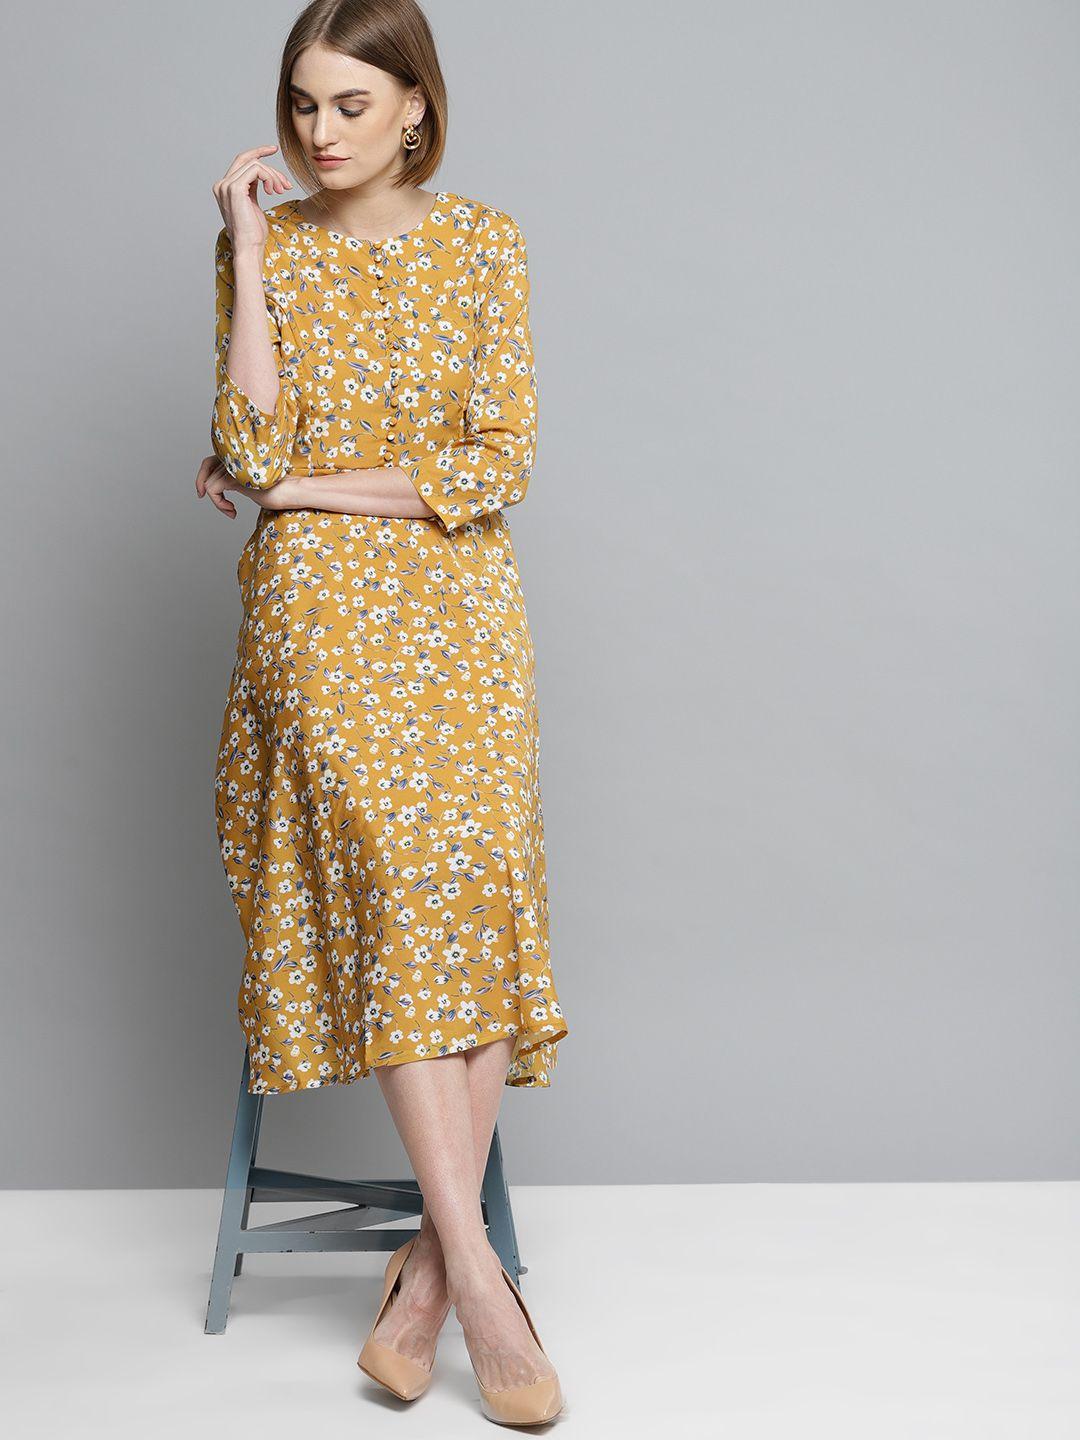 marie-claire-women-mustard-yellow-printed-fit-&-flare-dress